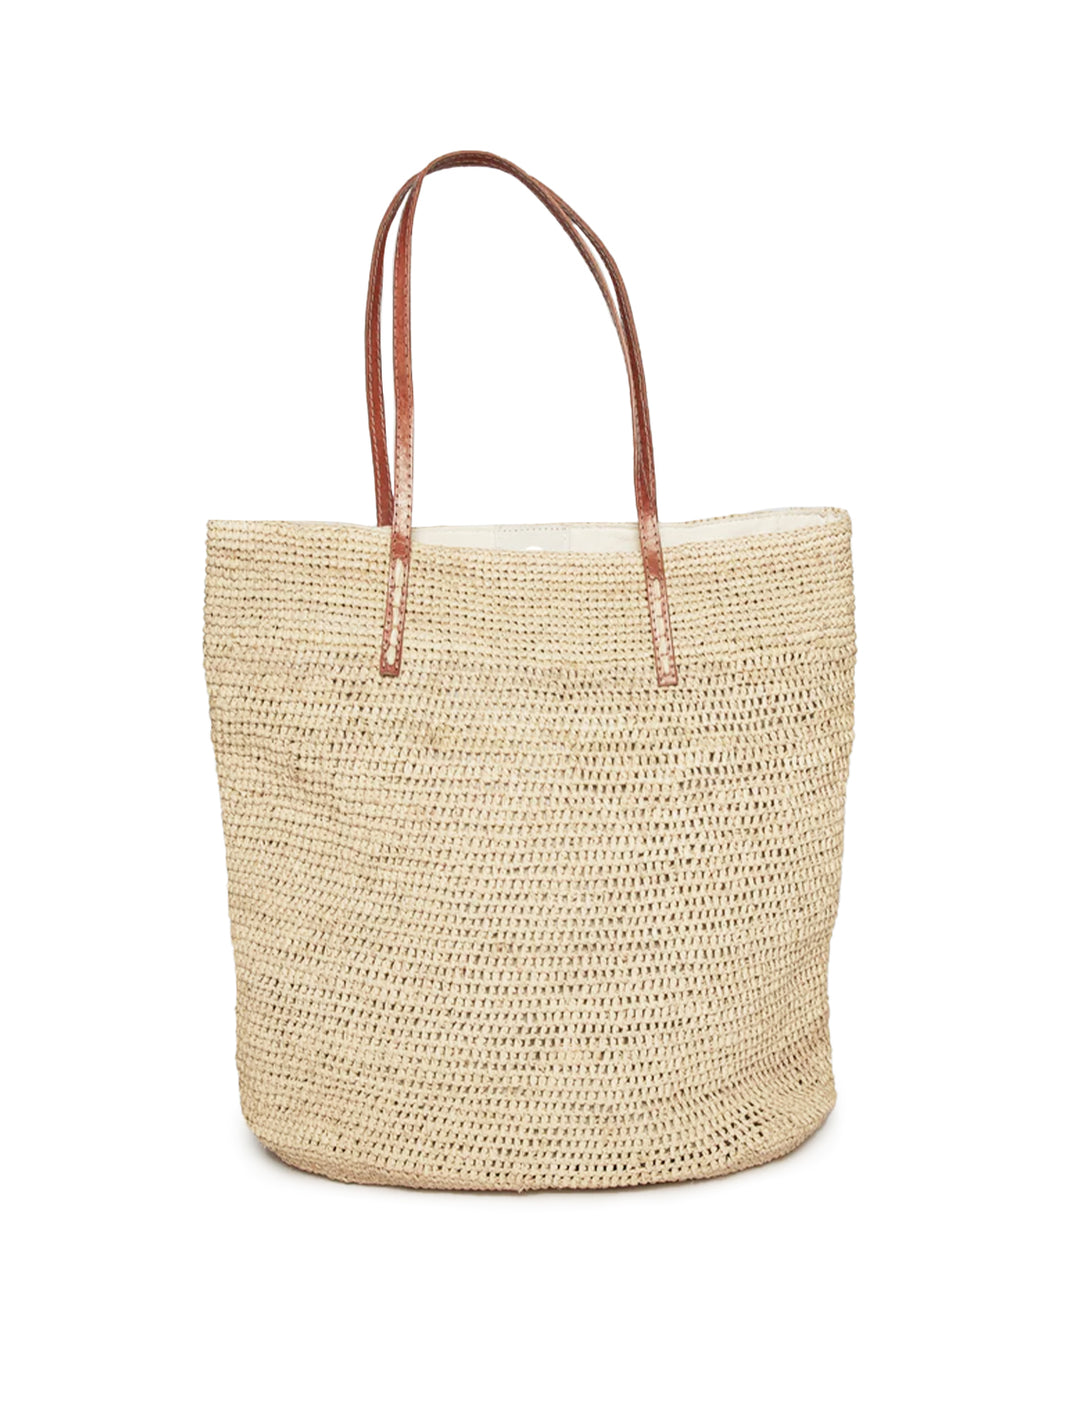 Front view of Hat Attack's lucia tote in natural.